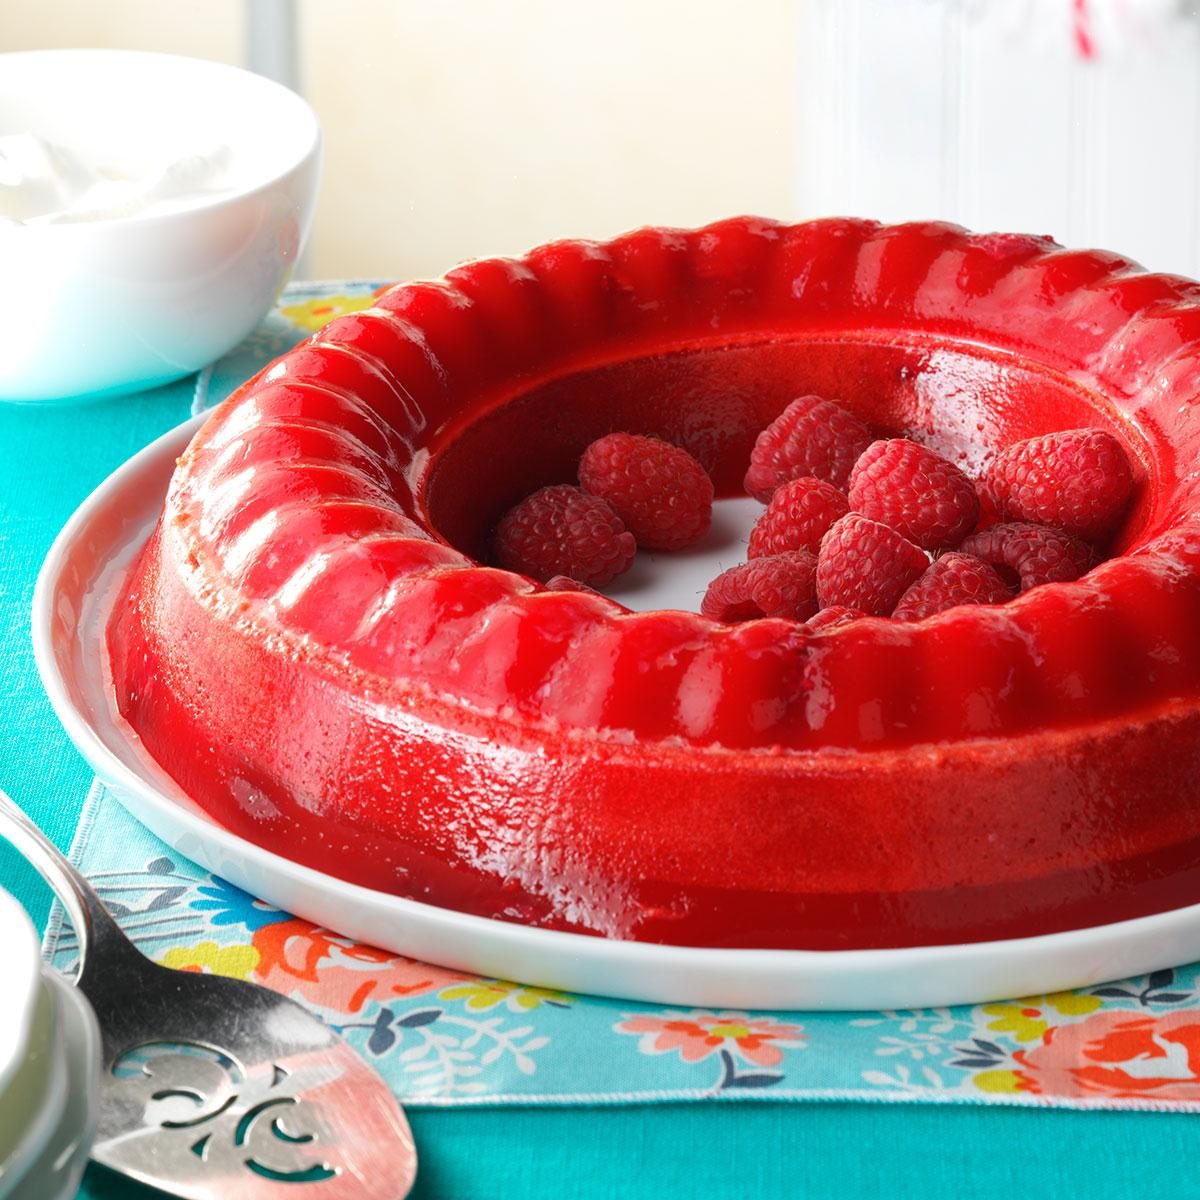 Berry Gelatin Mold Recipe: How to Make It